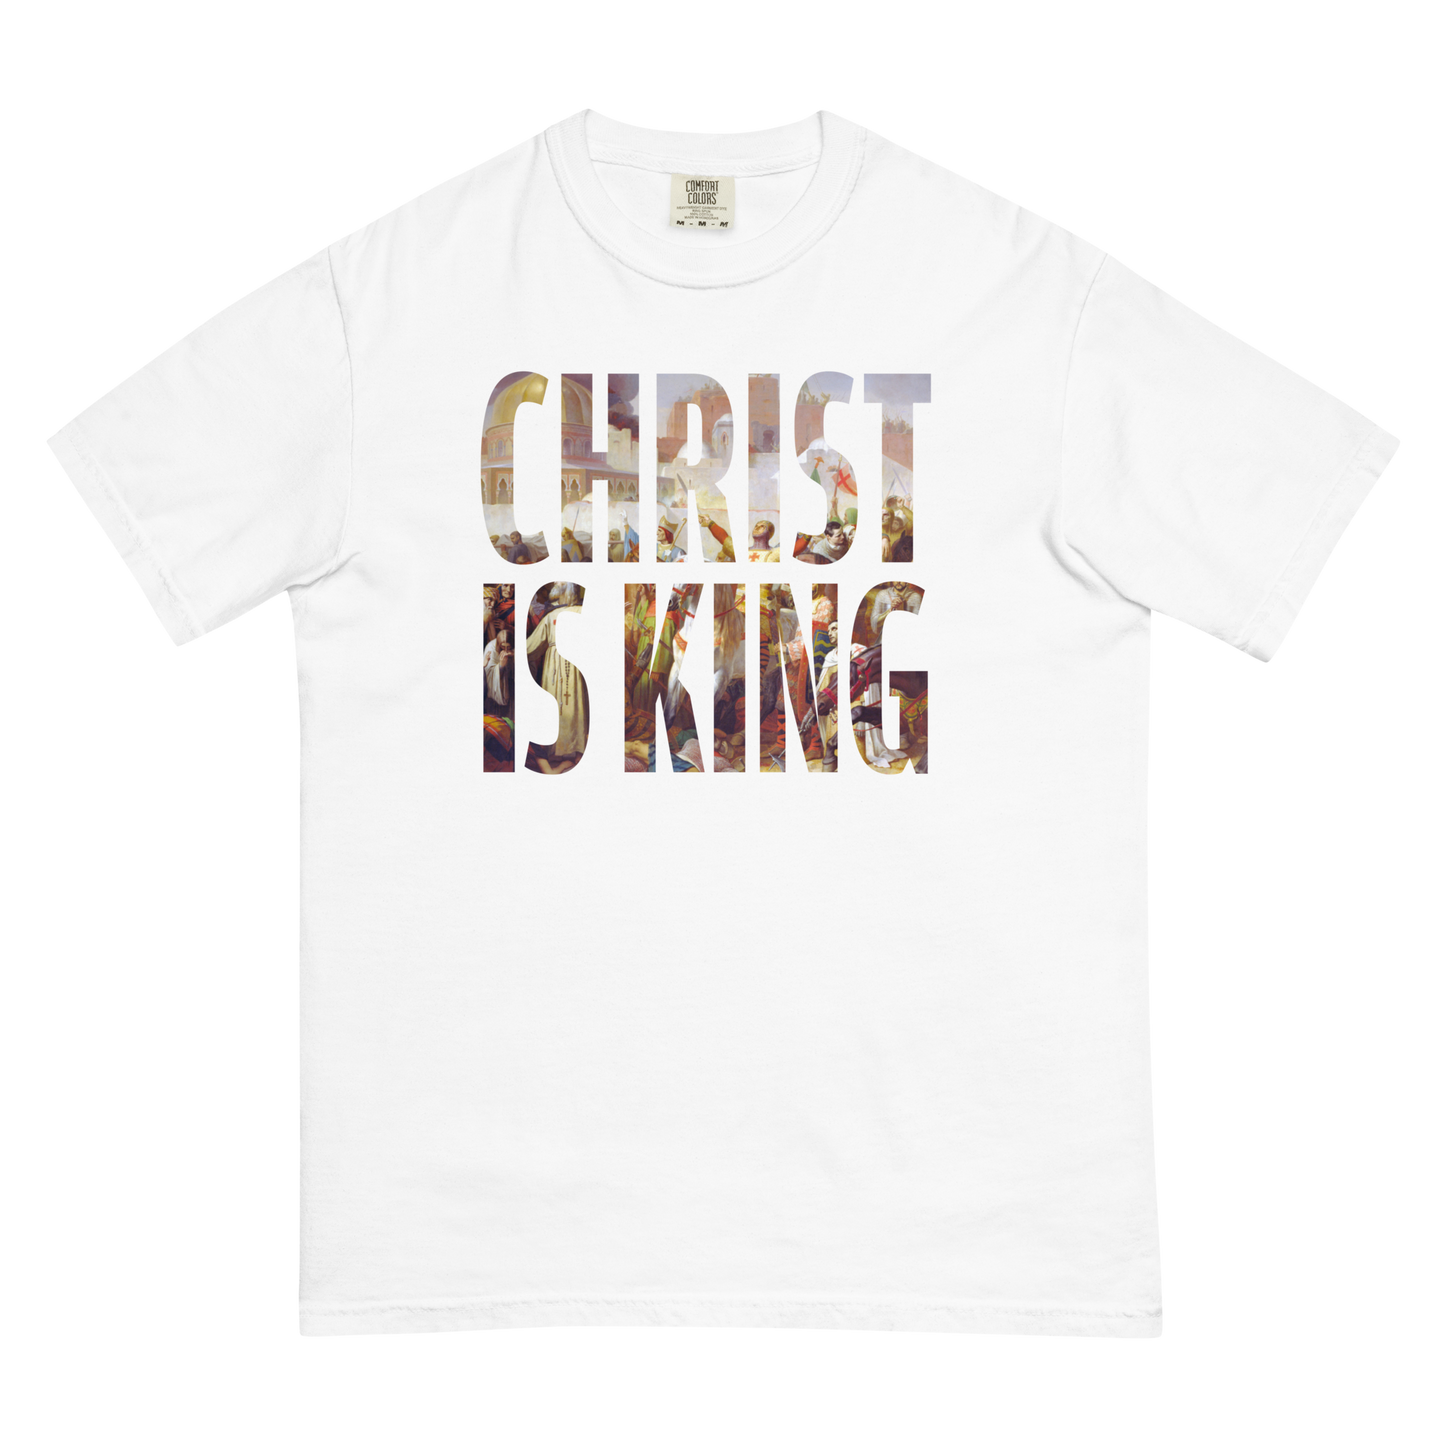 Christ Is King T-Shirt (Comfort Colors)